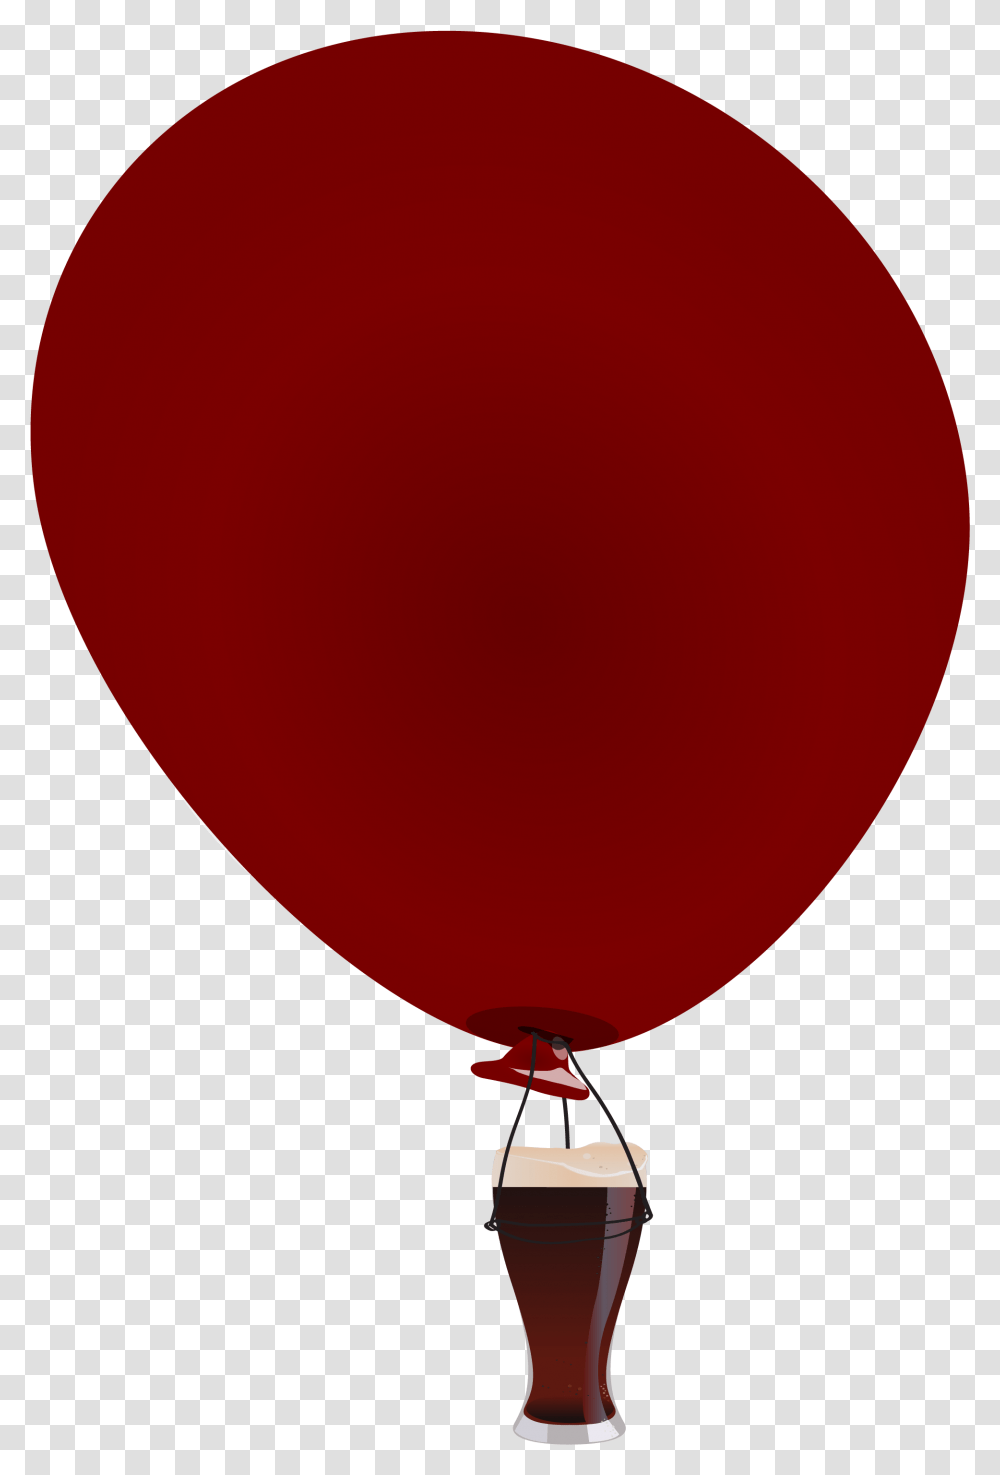 Leave A Reply Cancel Reply Black Metal, Balloon, Transportation, Vehicle, Aircraft Transparent Png